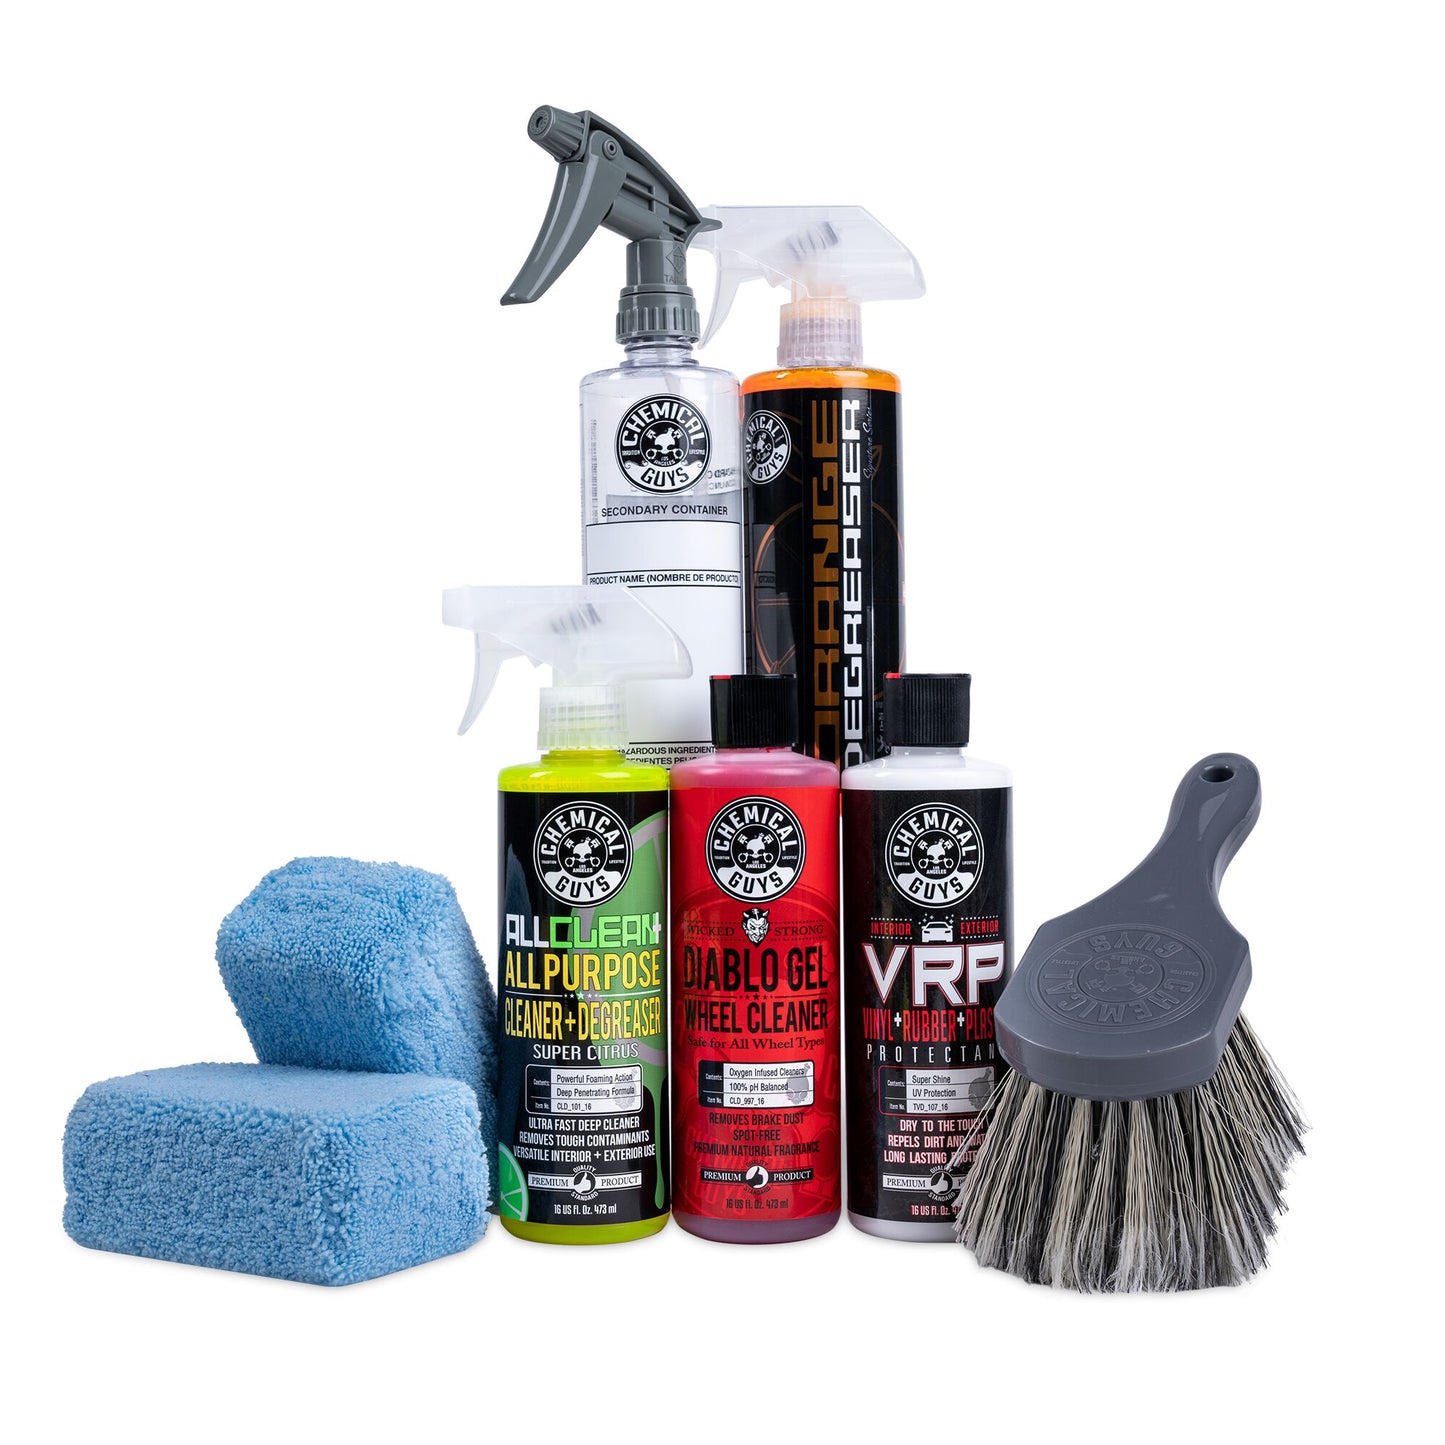 All Exterior Clean, Shine & Protect Kit